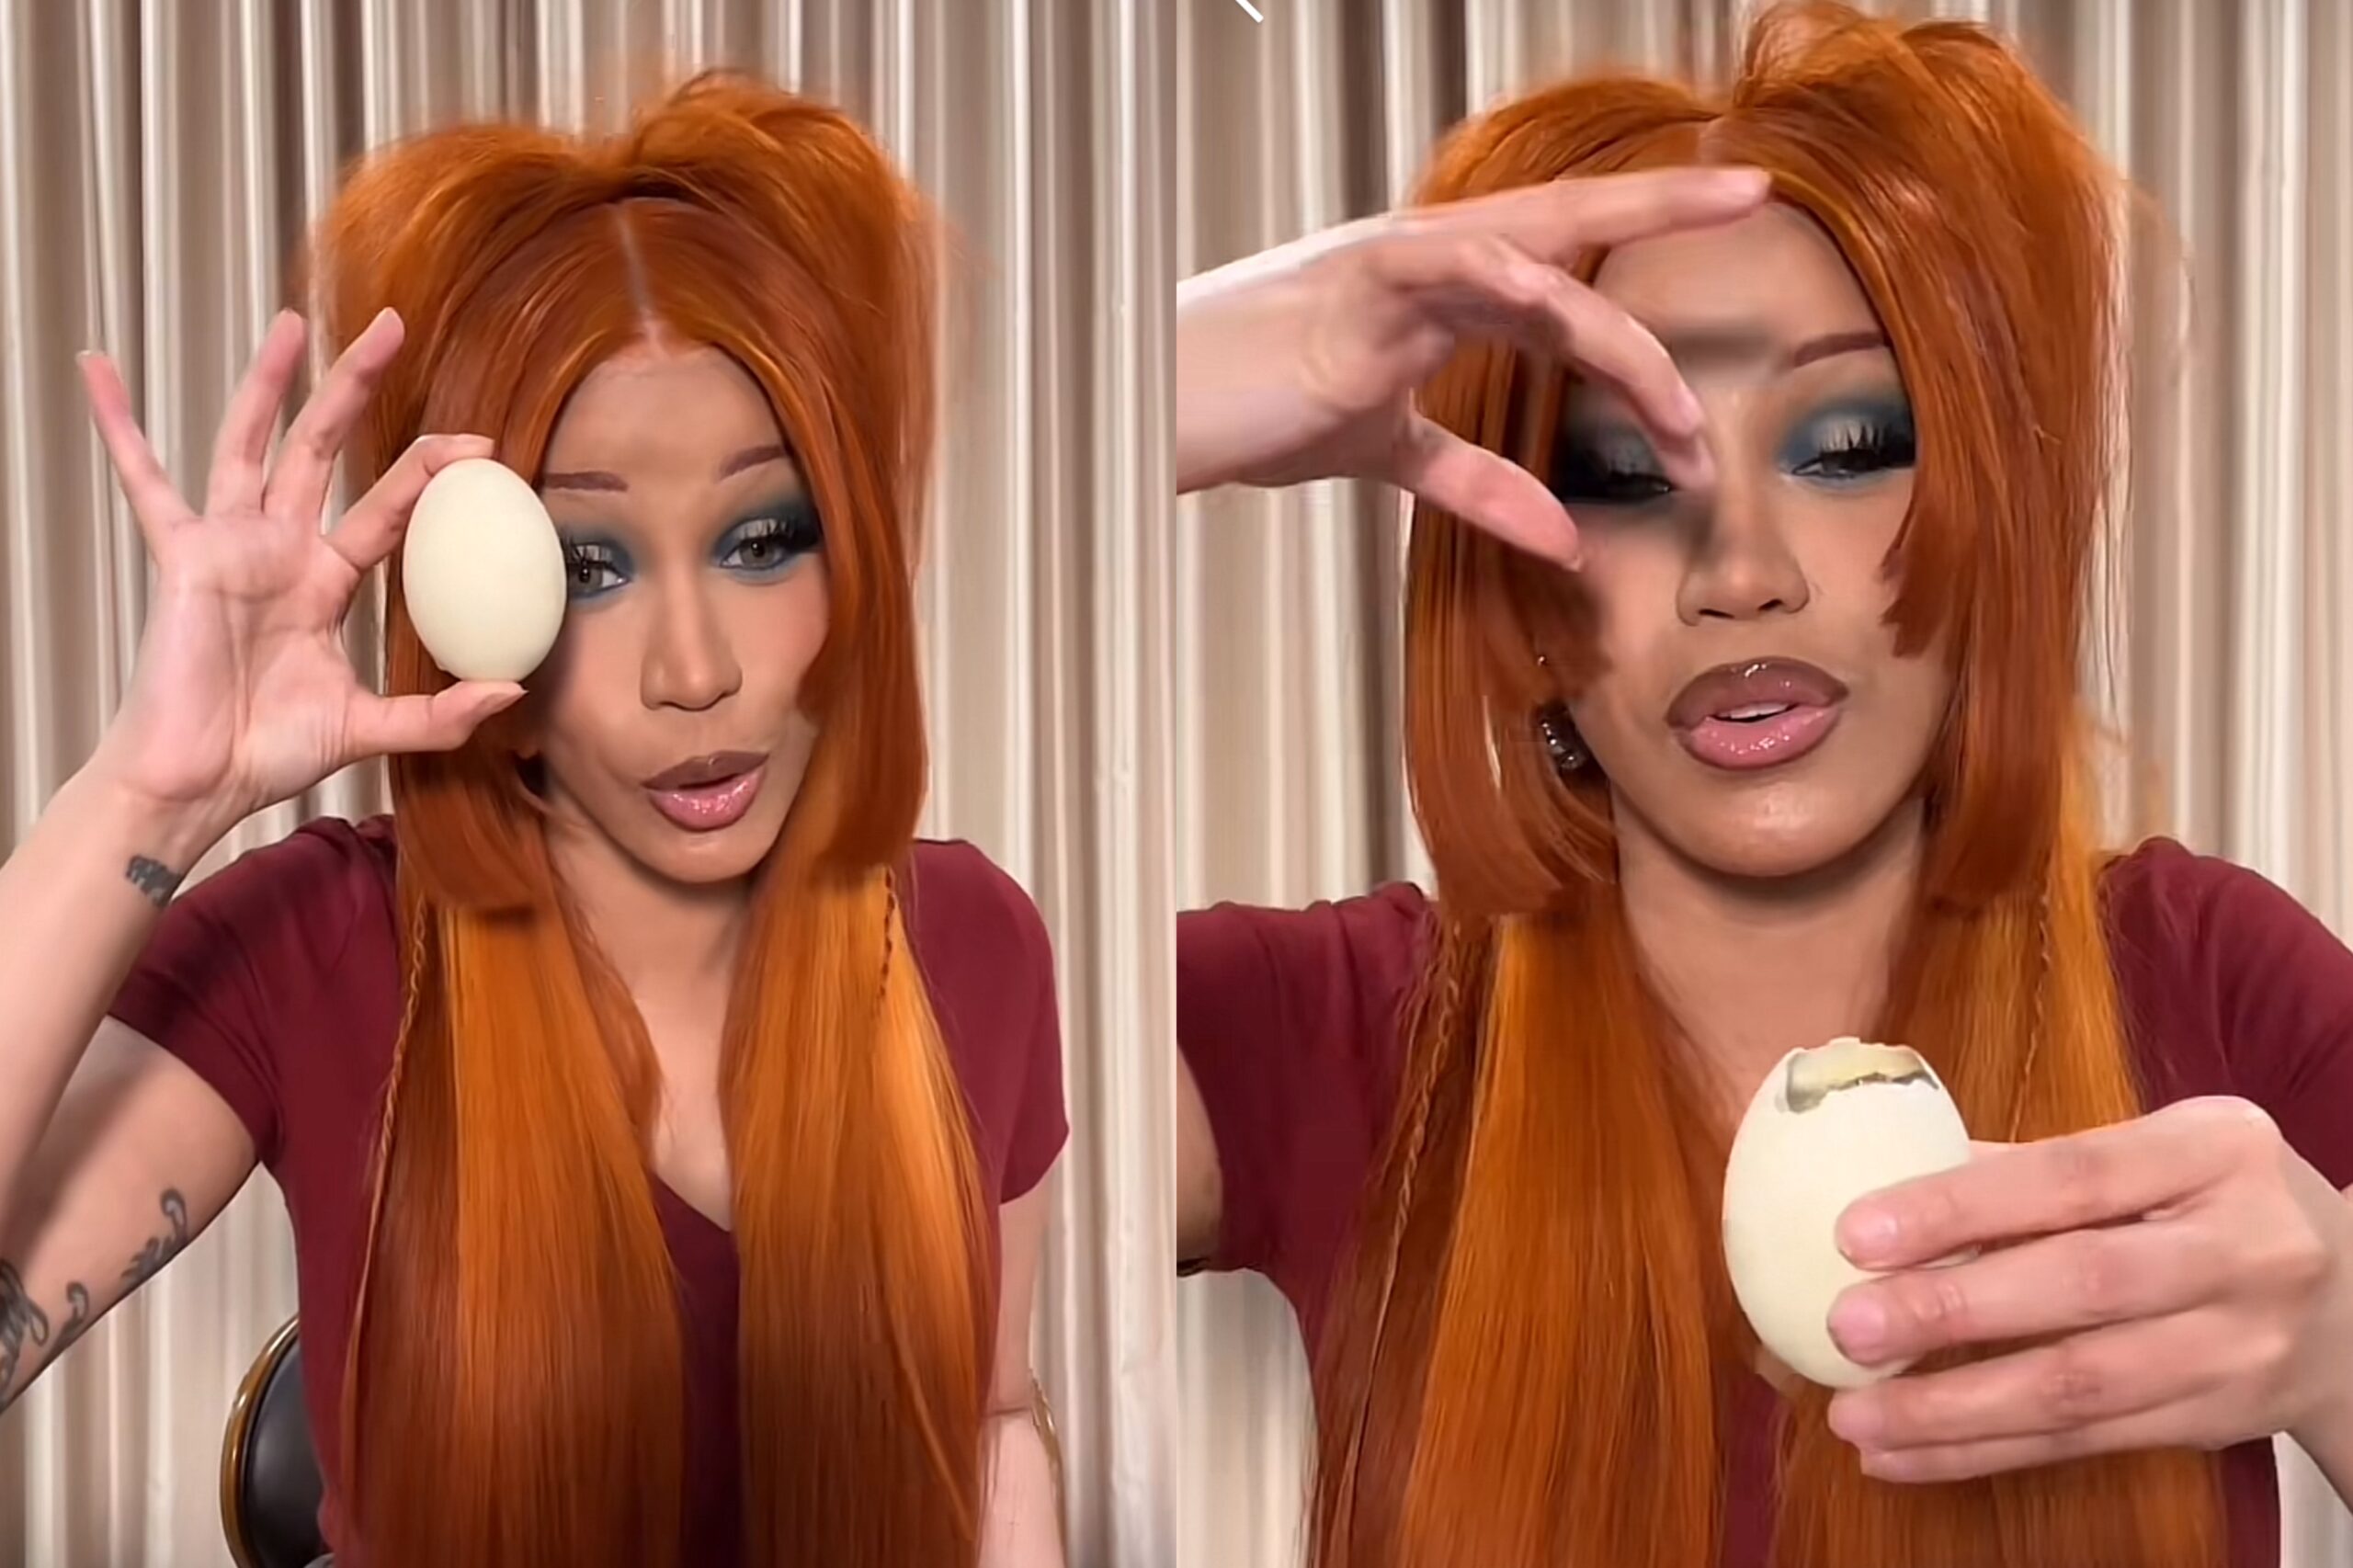 Cardi B tries balut for the first time: 'Not for me'